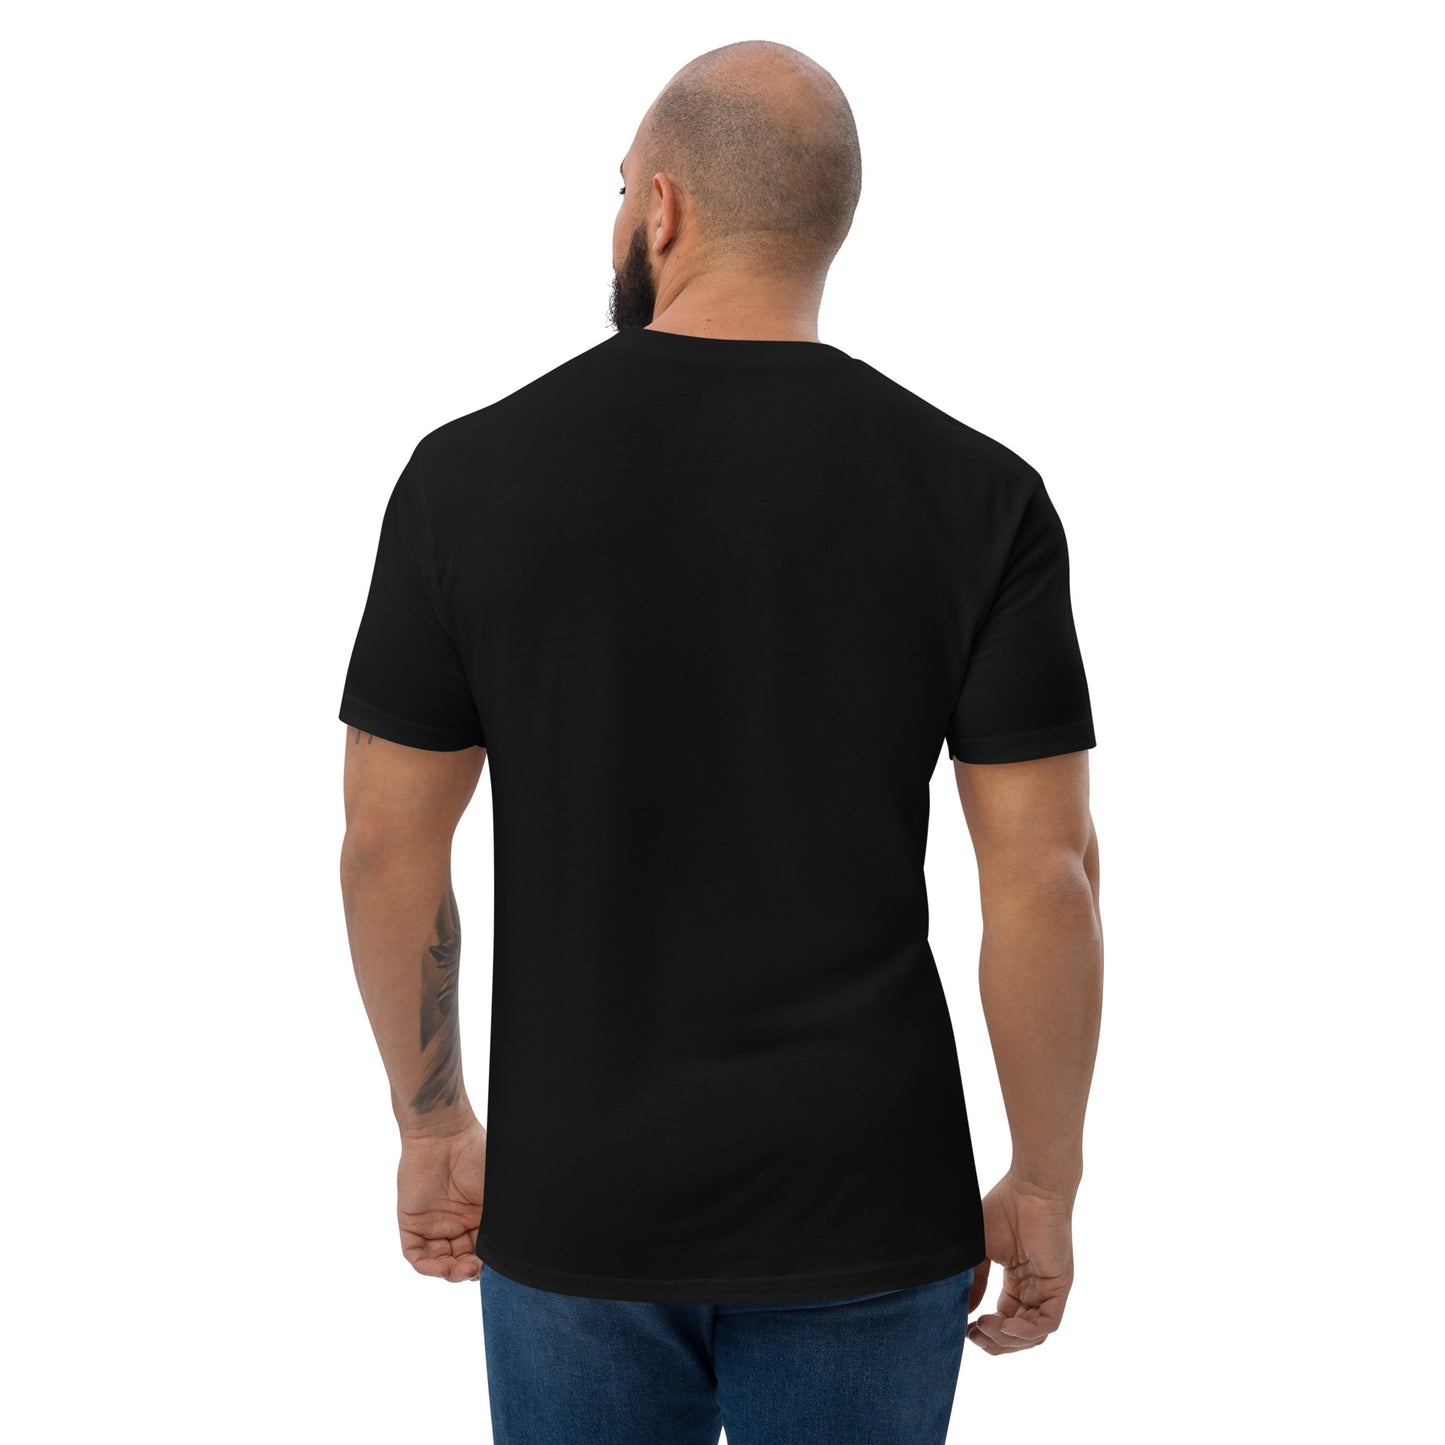 ONLY PANS Fitted Short Sleeve T-shirt